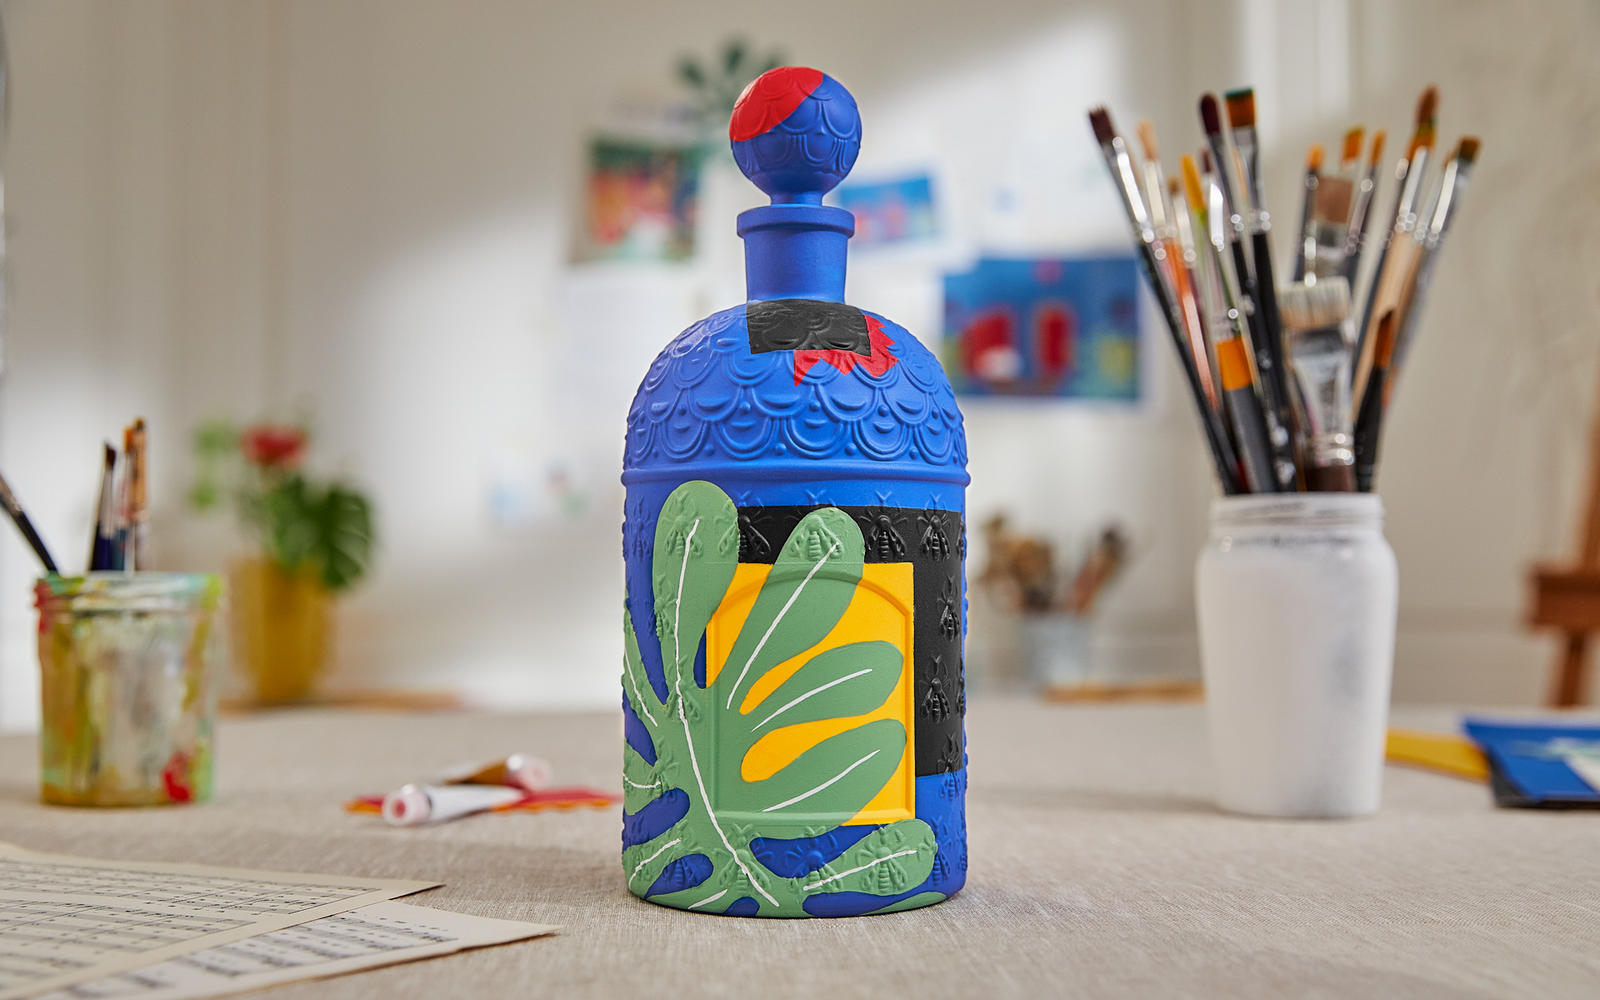 Experience the Art of Scent with the $17000 Guerlain Fragrance Bottle Inspired by Henri Matisse